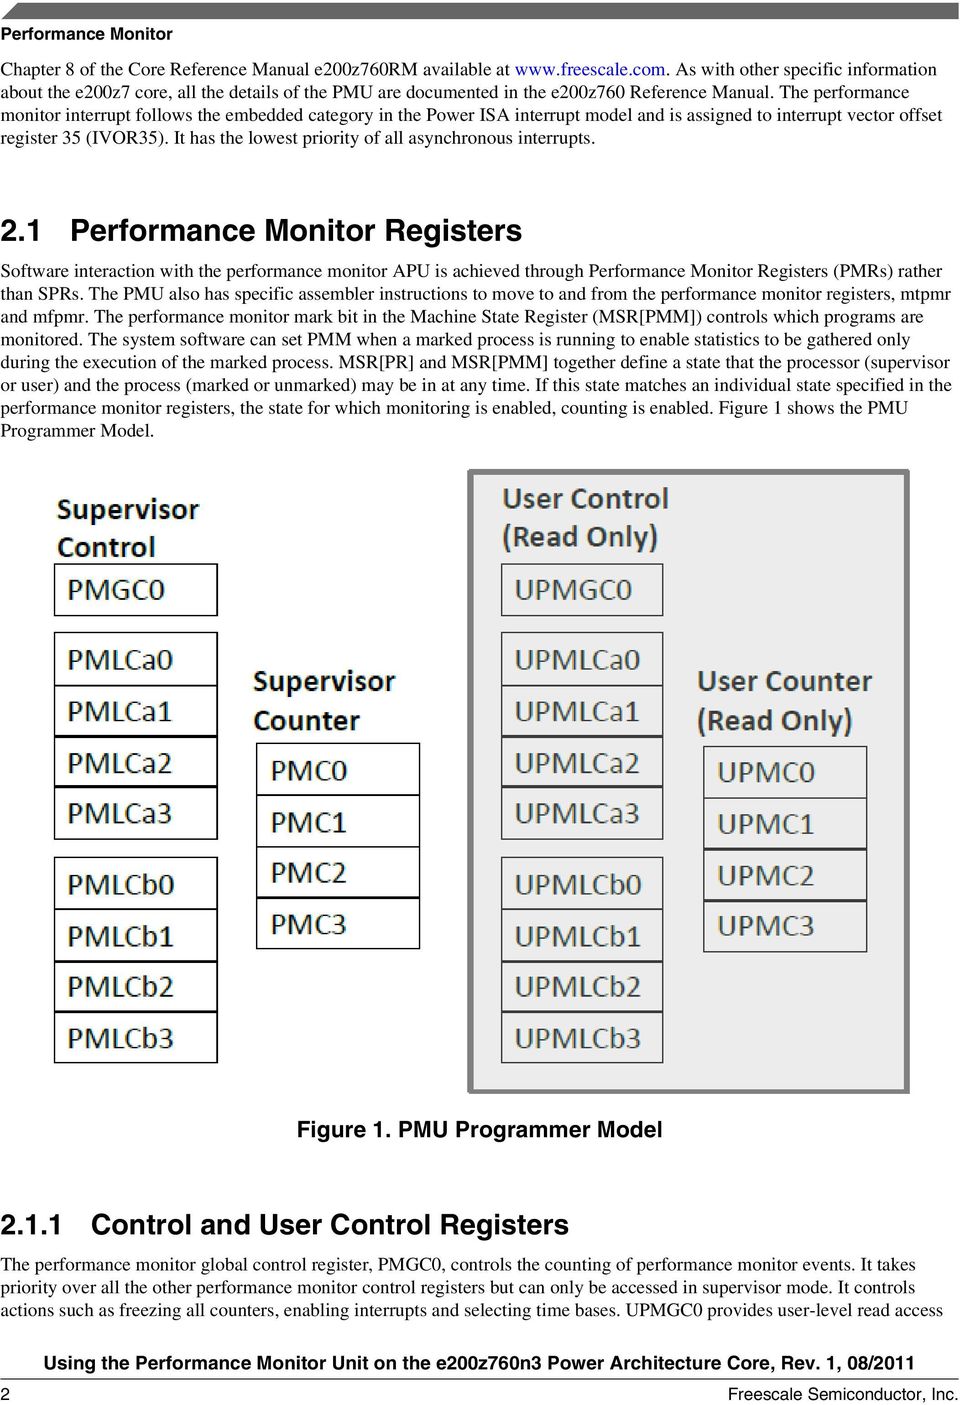 The performance monitor interrupt follows the embedded category in the Power ISA interrupt model and is assigned to interrupt vector offset register 35 (IVOR35).